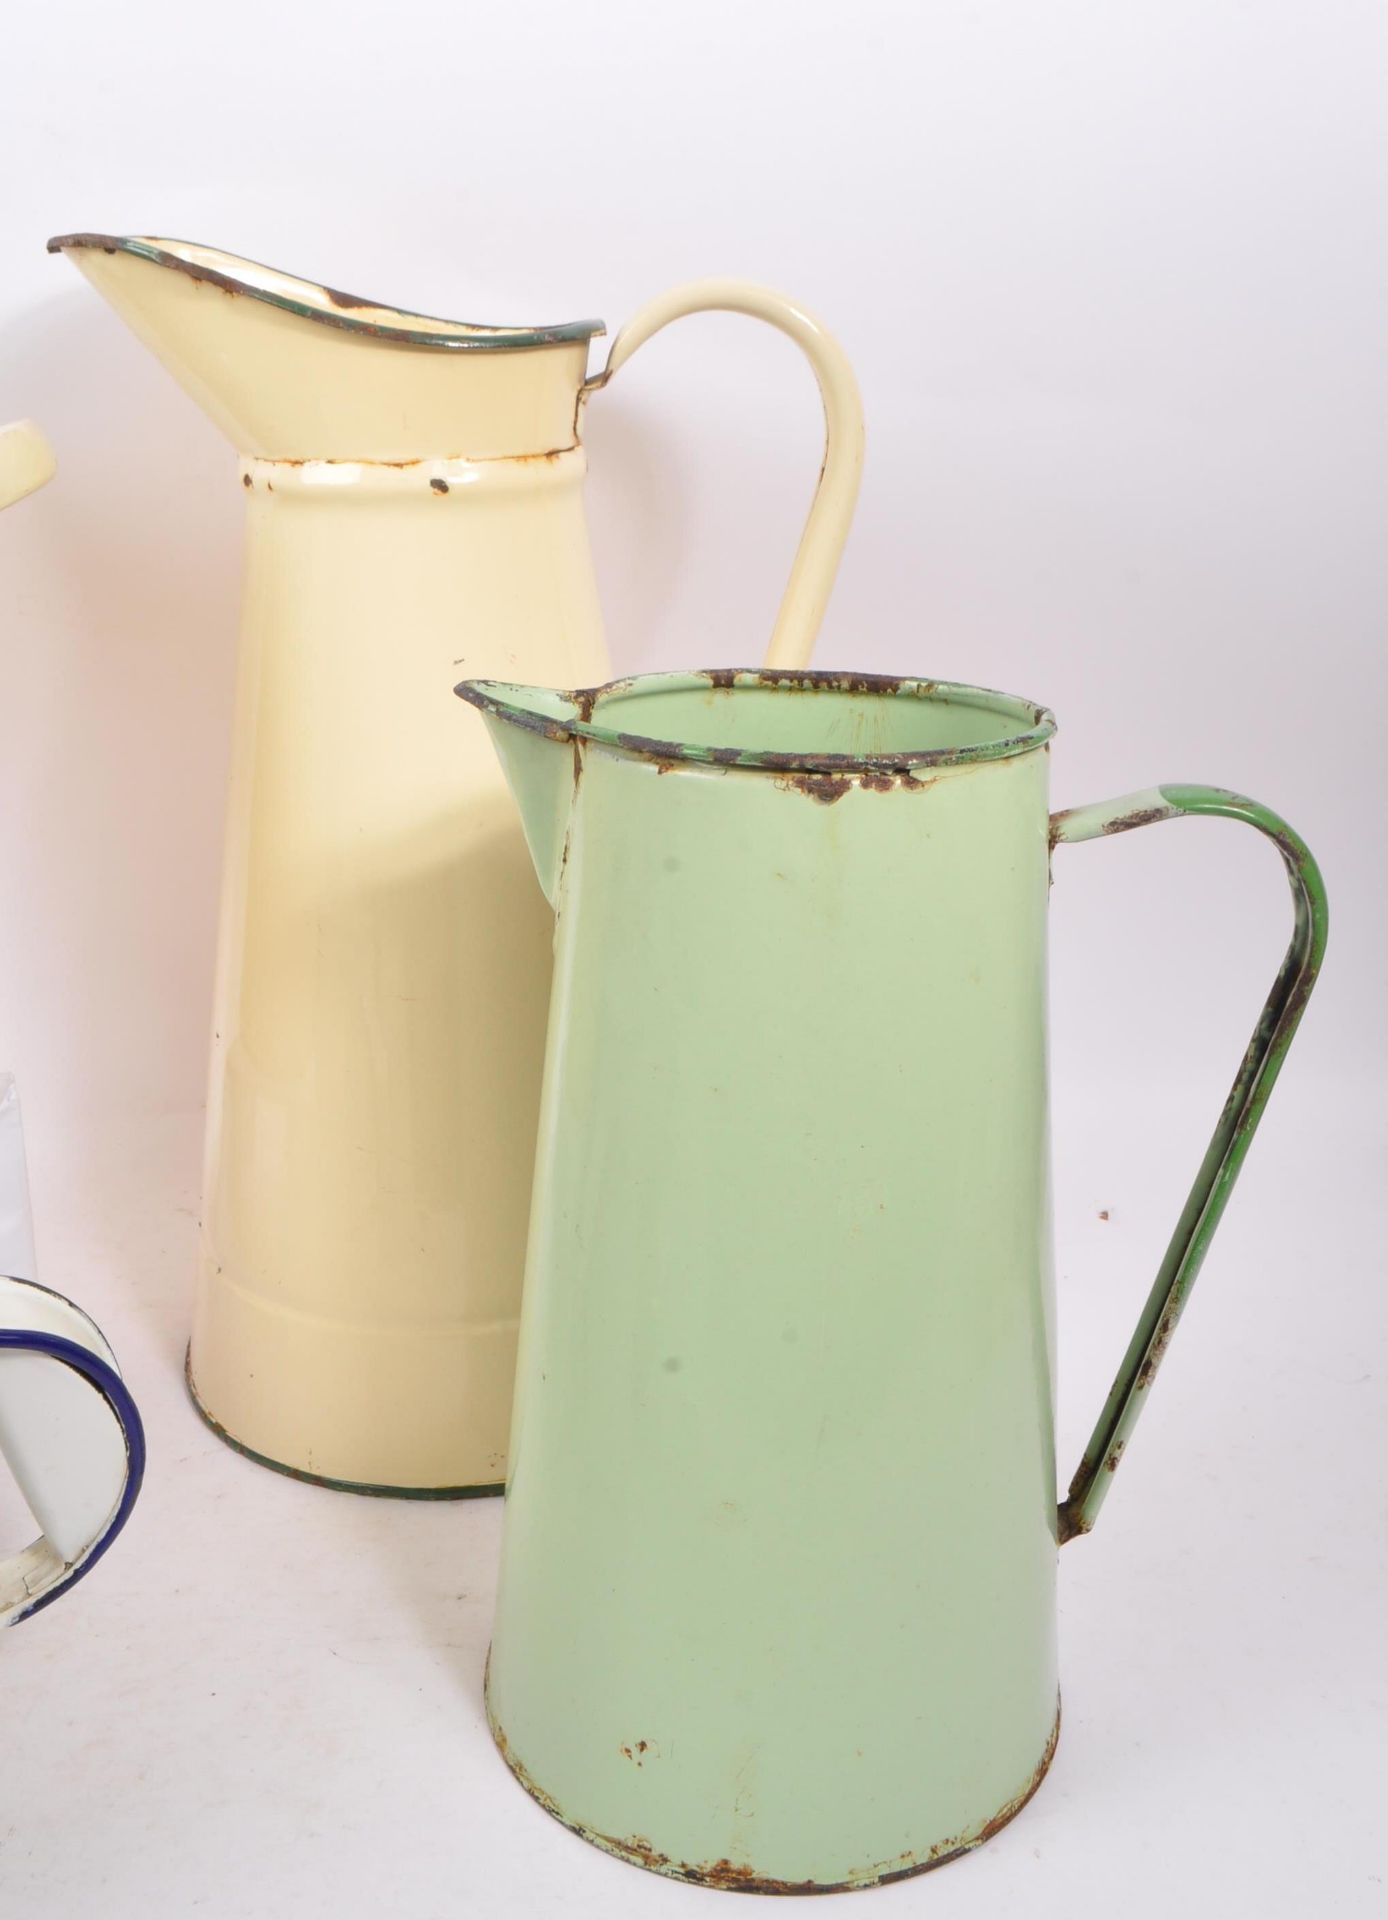 COLLECTION OF VINTAGE 20TH CENTURY ENAMEL WARE JUGS - Image 5 of 5